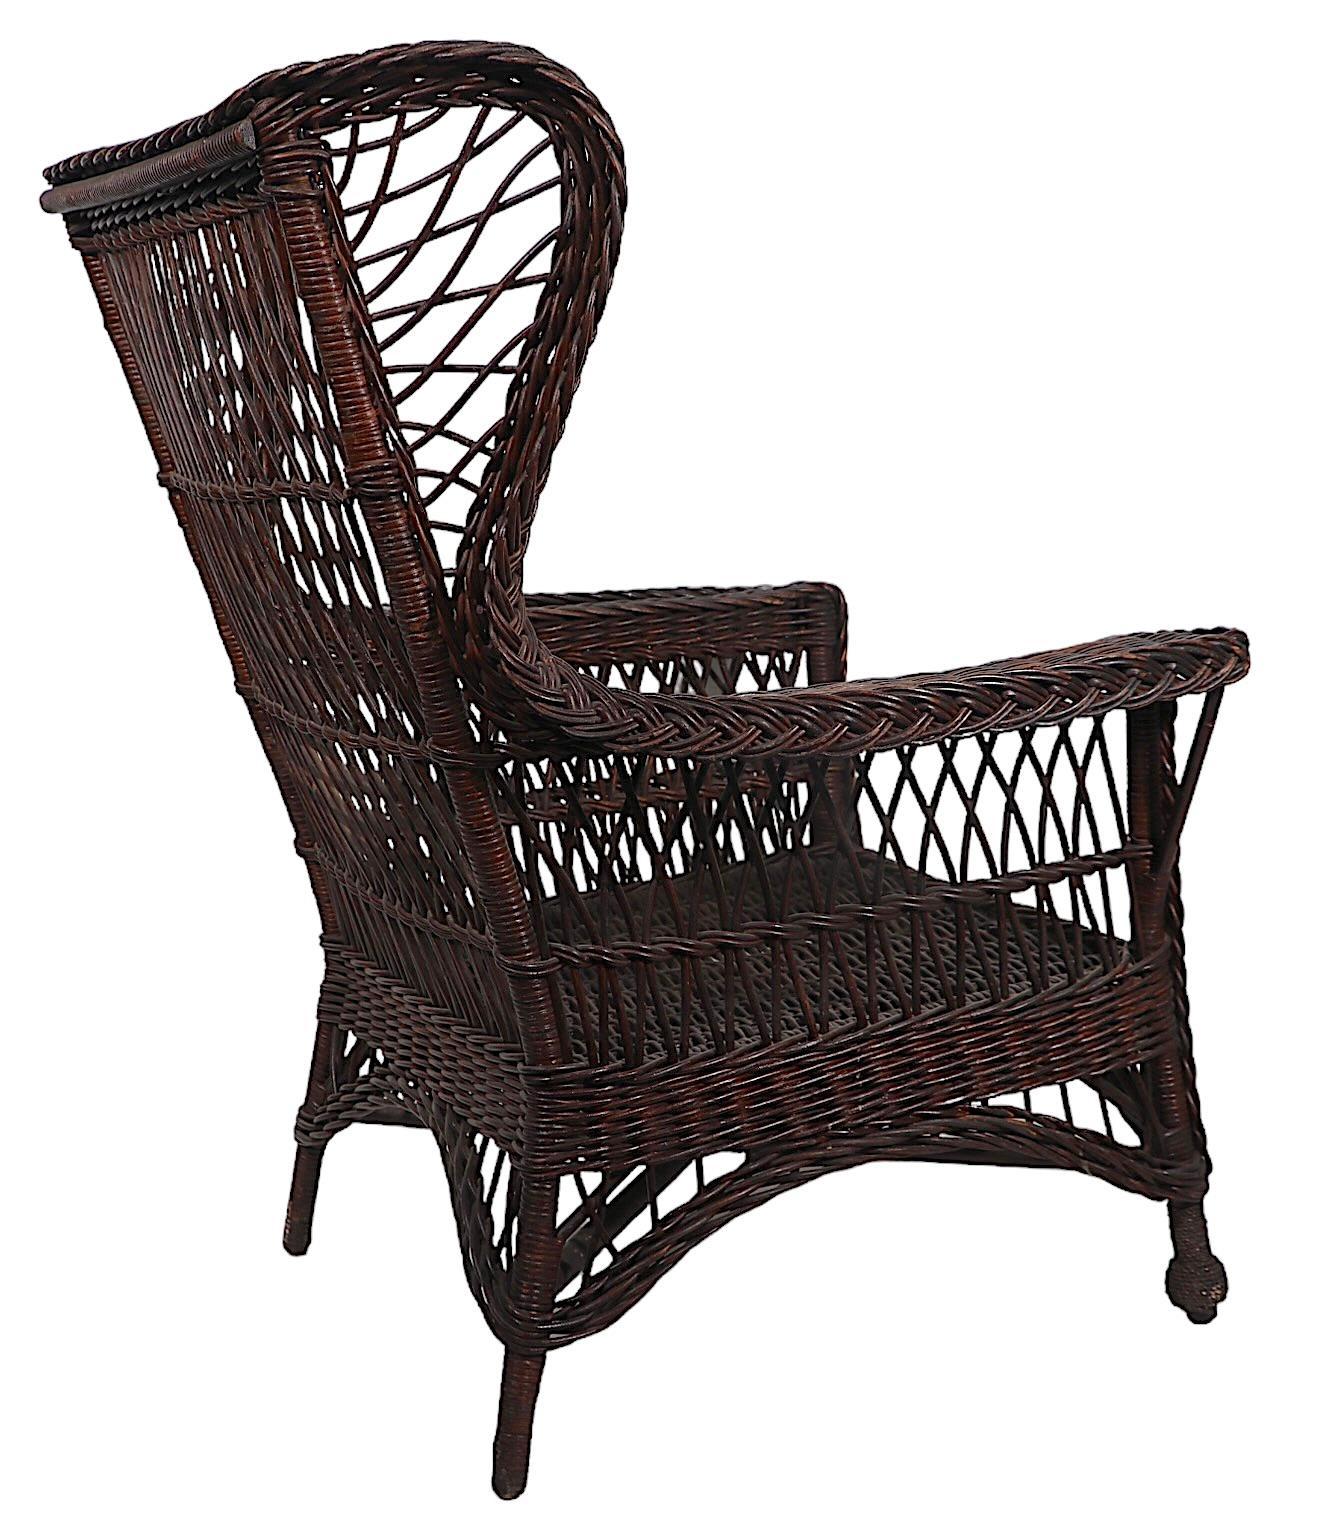 Classic Bar Harbor Victorian wicker arm, lounge, wing  chair. The chair has classic braided woven wicker edging, with cross hatched wicker back, and  seat, beehive feet and  a magazine rack arm. The chair is in very good, original, clean and ready